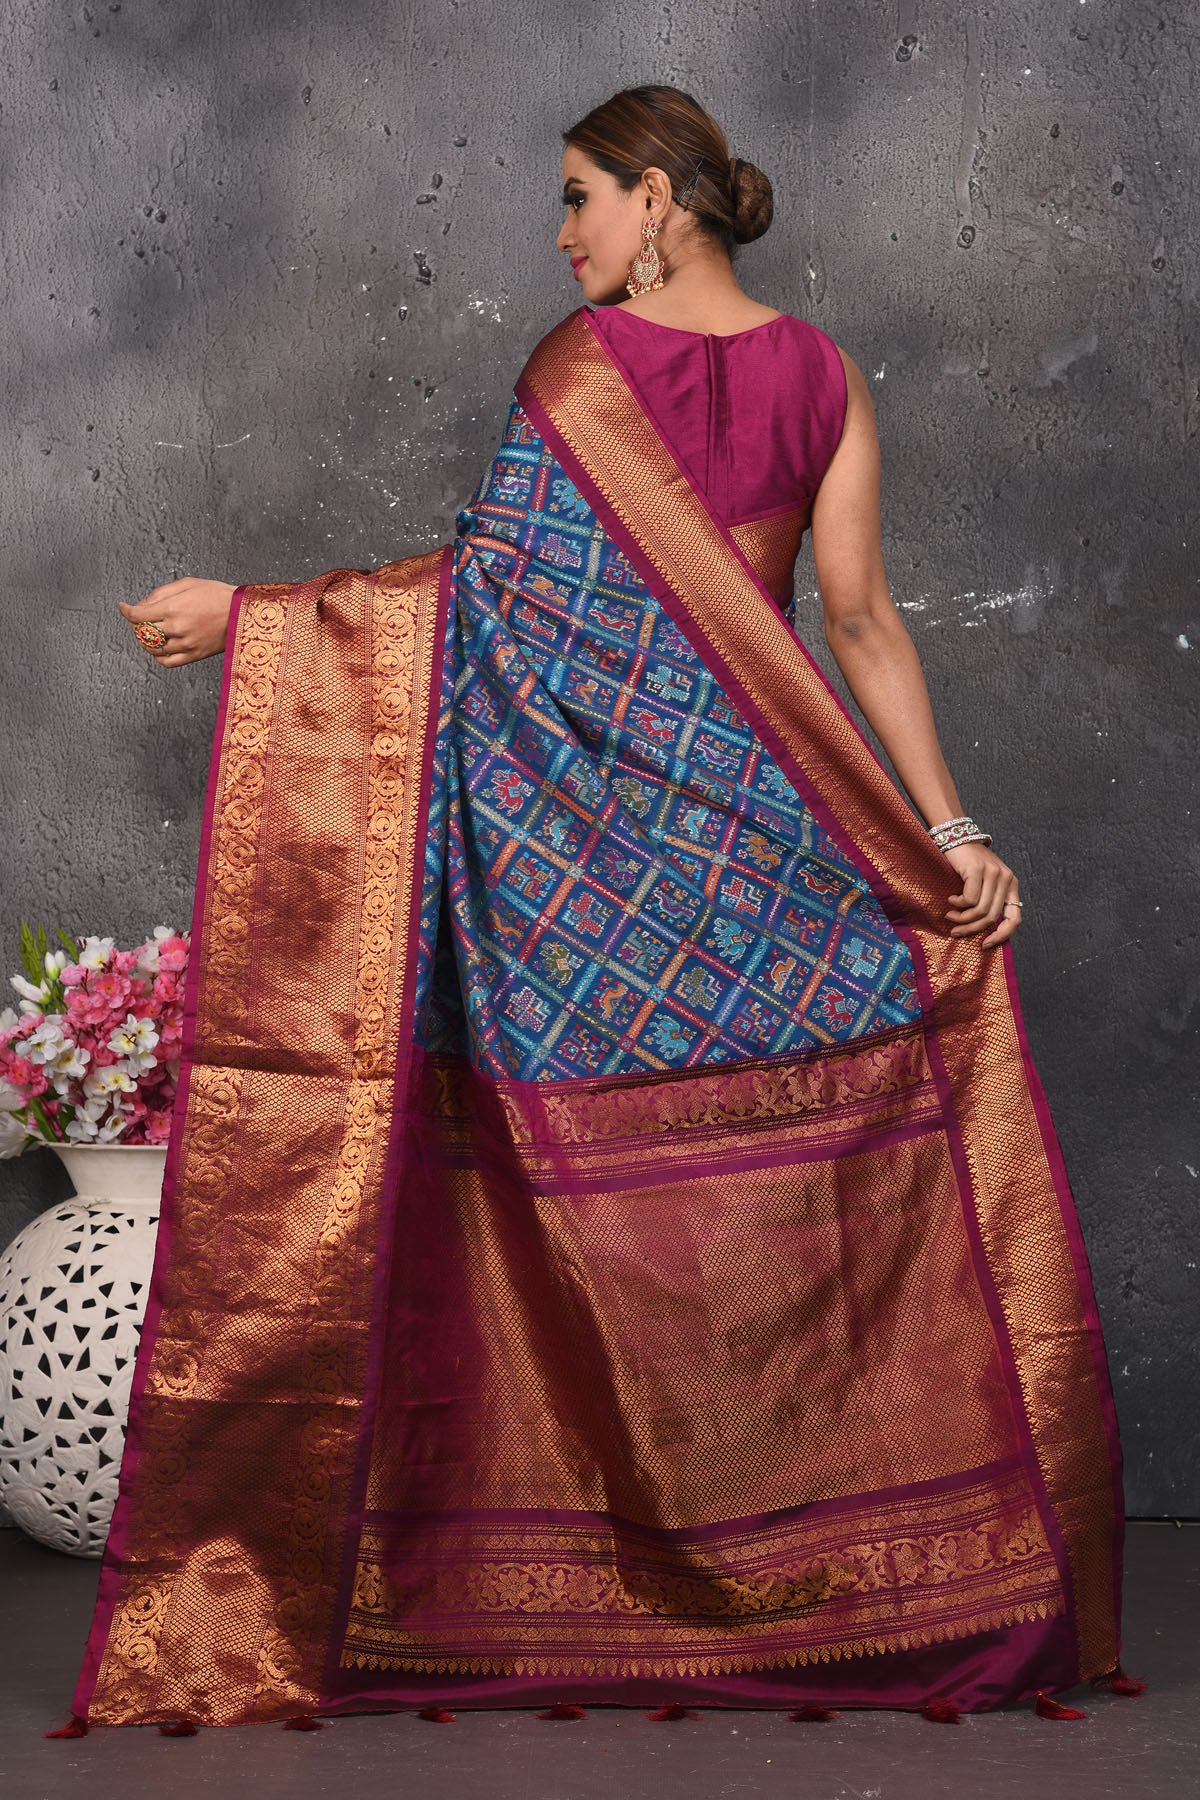 Buy this royal banarasi silk saree with pashmina weaving adorned with antique zari work online in USA which has crafted by skilled weaver of Banaras with elegance and grace, this saree is definitely the epitome of beauty and a must have in your collection. Buy designer handwoven banarasi pashmina sari with any blouse from Pure Elegance Indian saree store in USA.- Back view with open pallu.